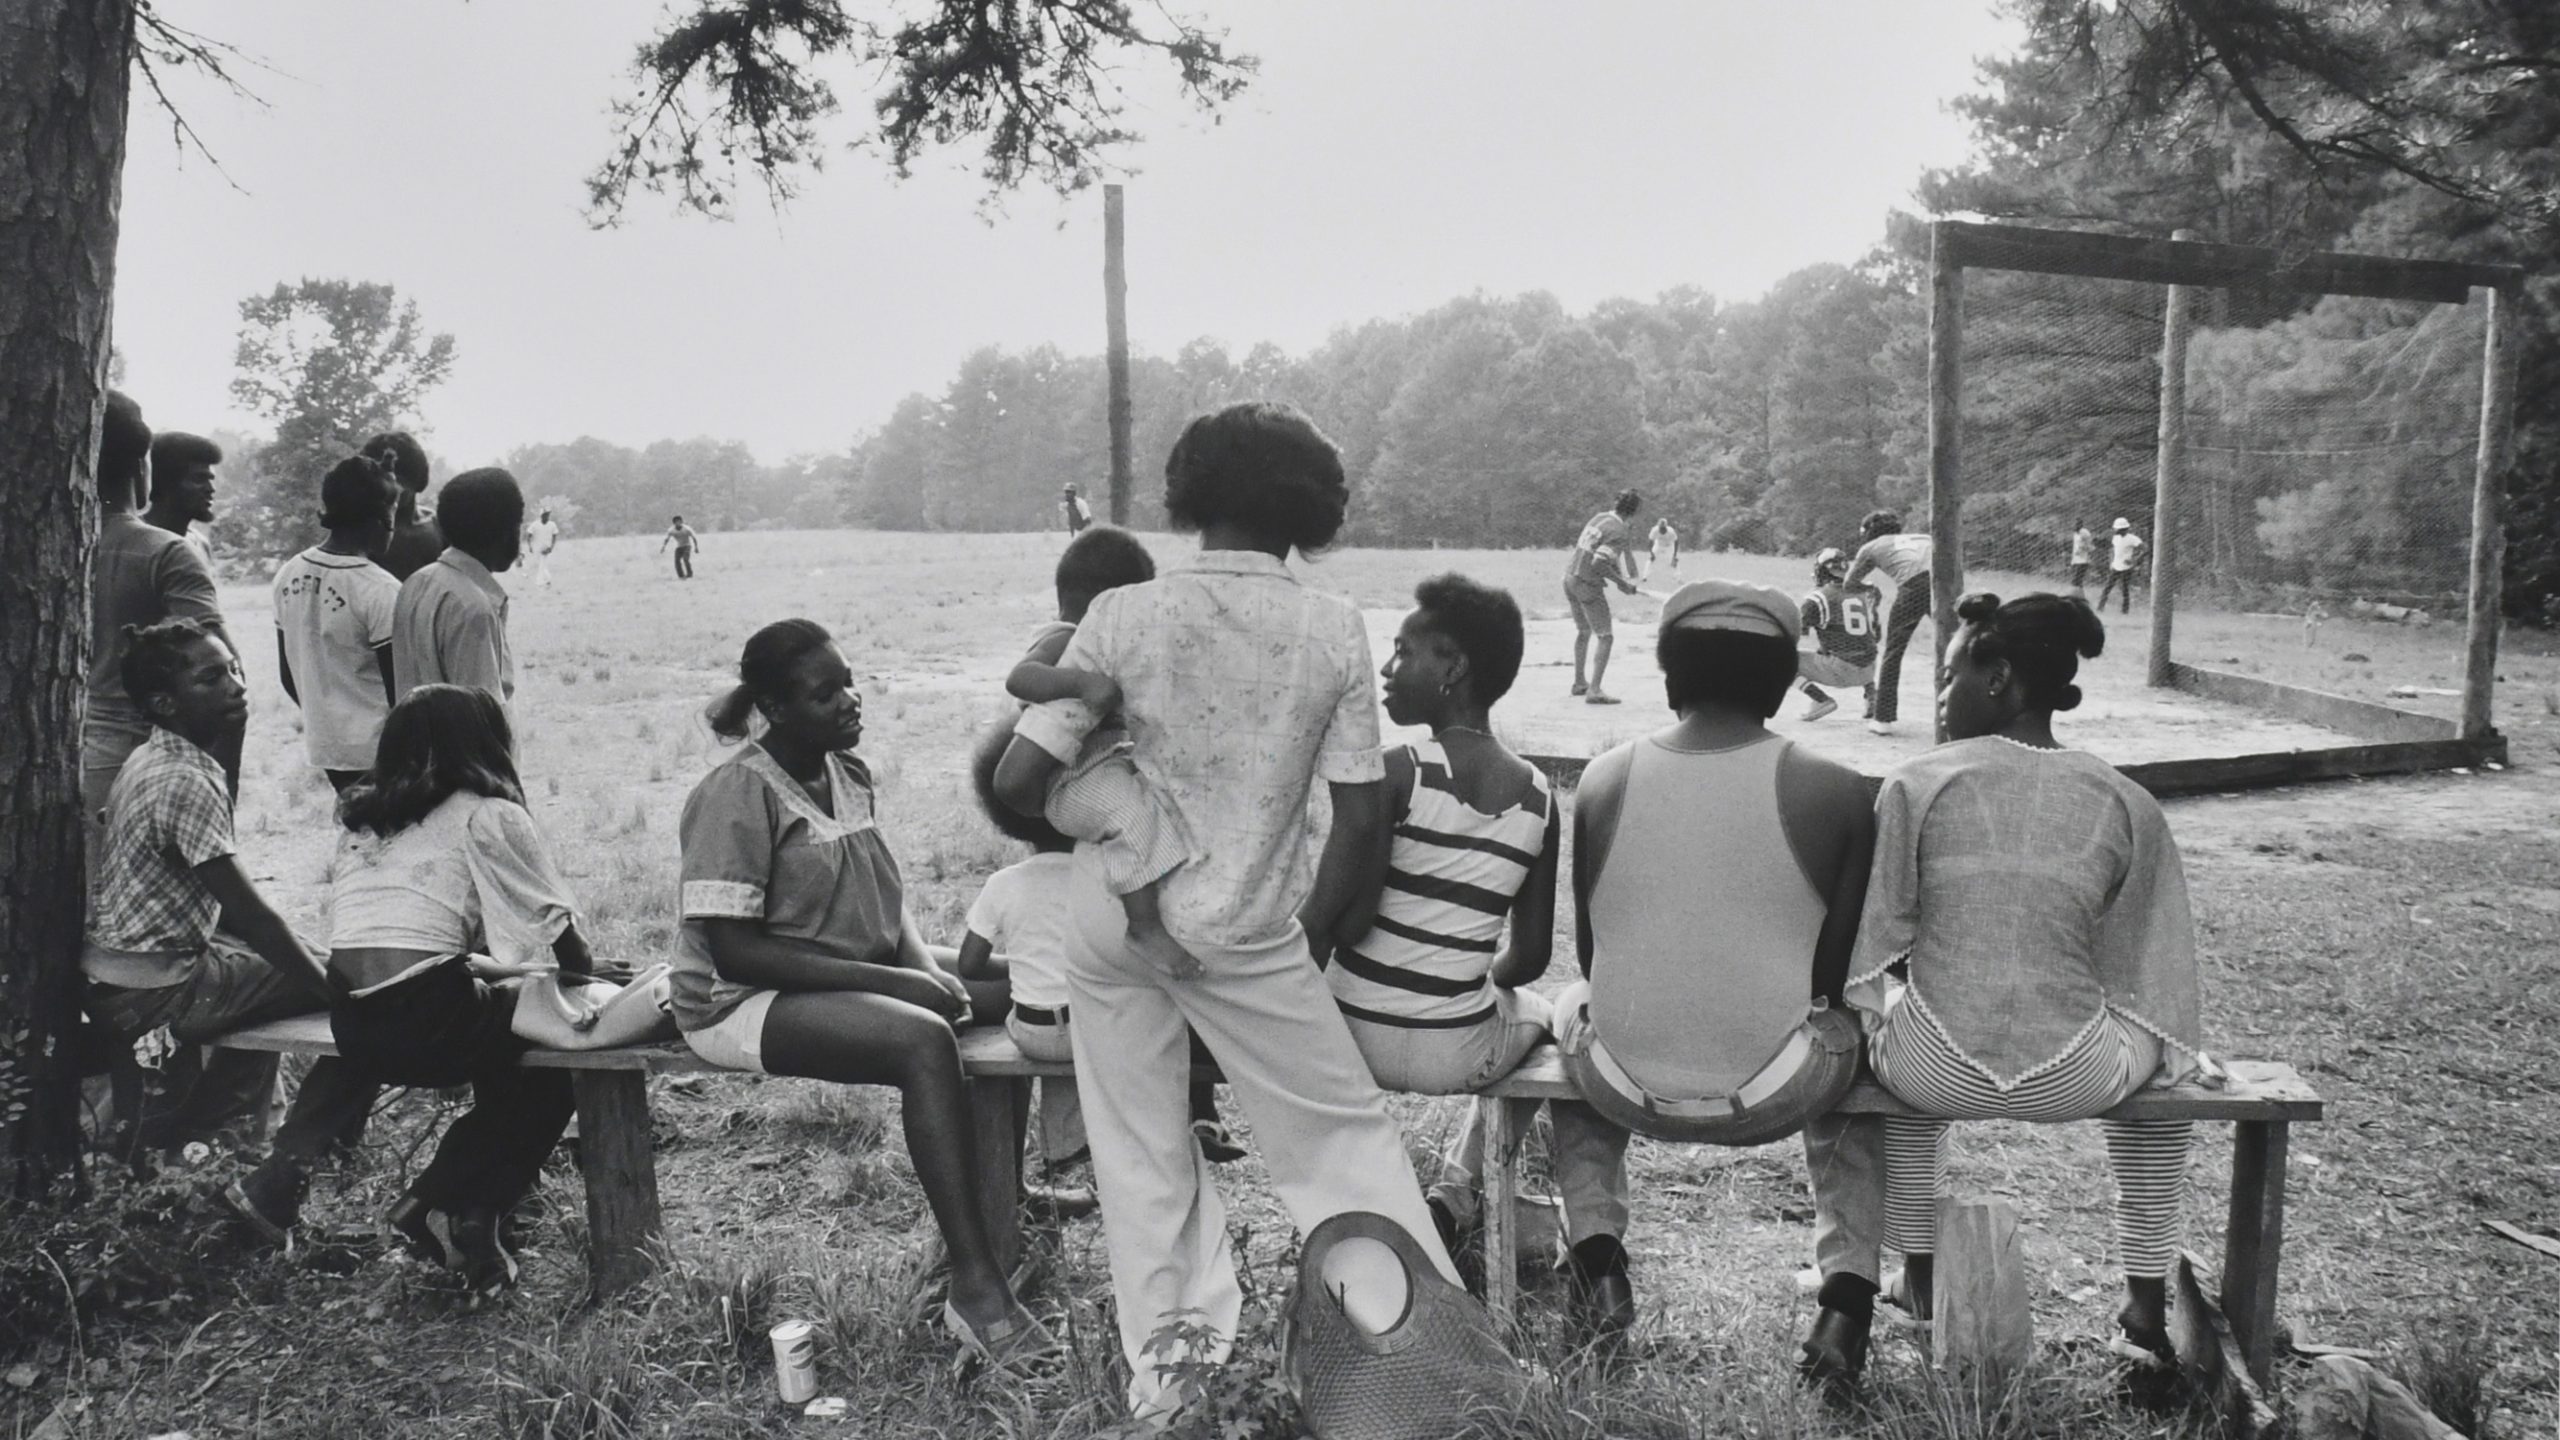 Black and white photograph of a baseball game happening in an open grass field. A crowd of black men and women sitting and gathering around a bench is in the foreground of the photo.